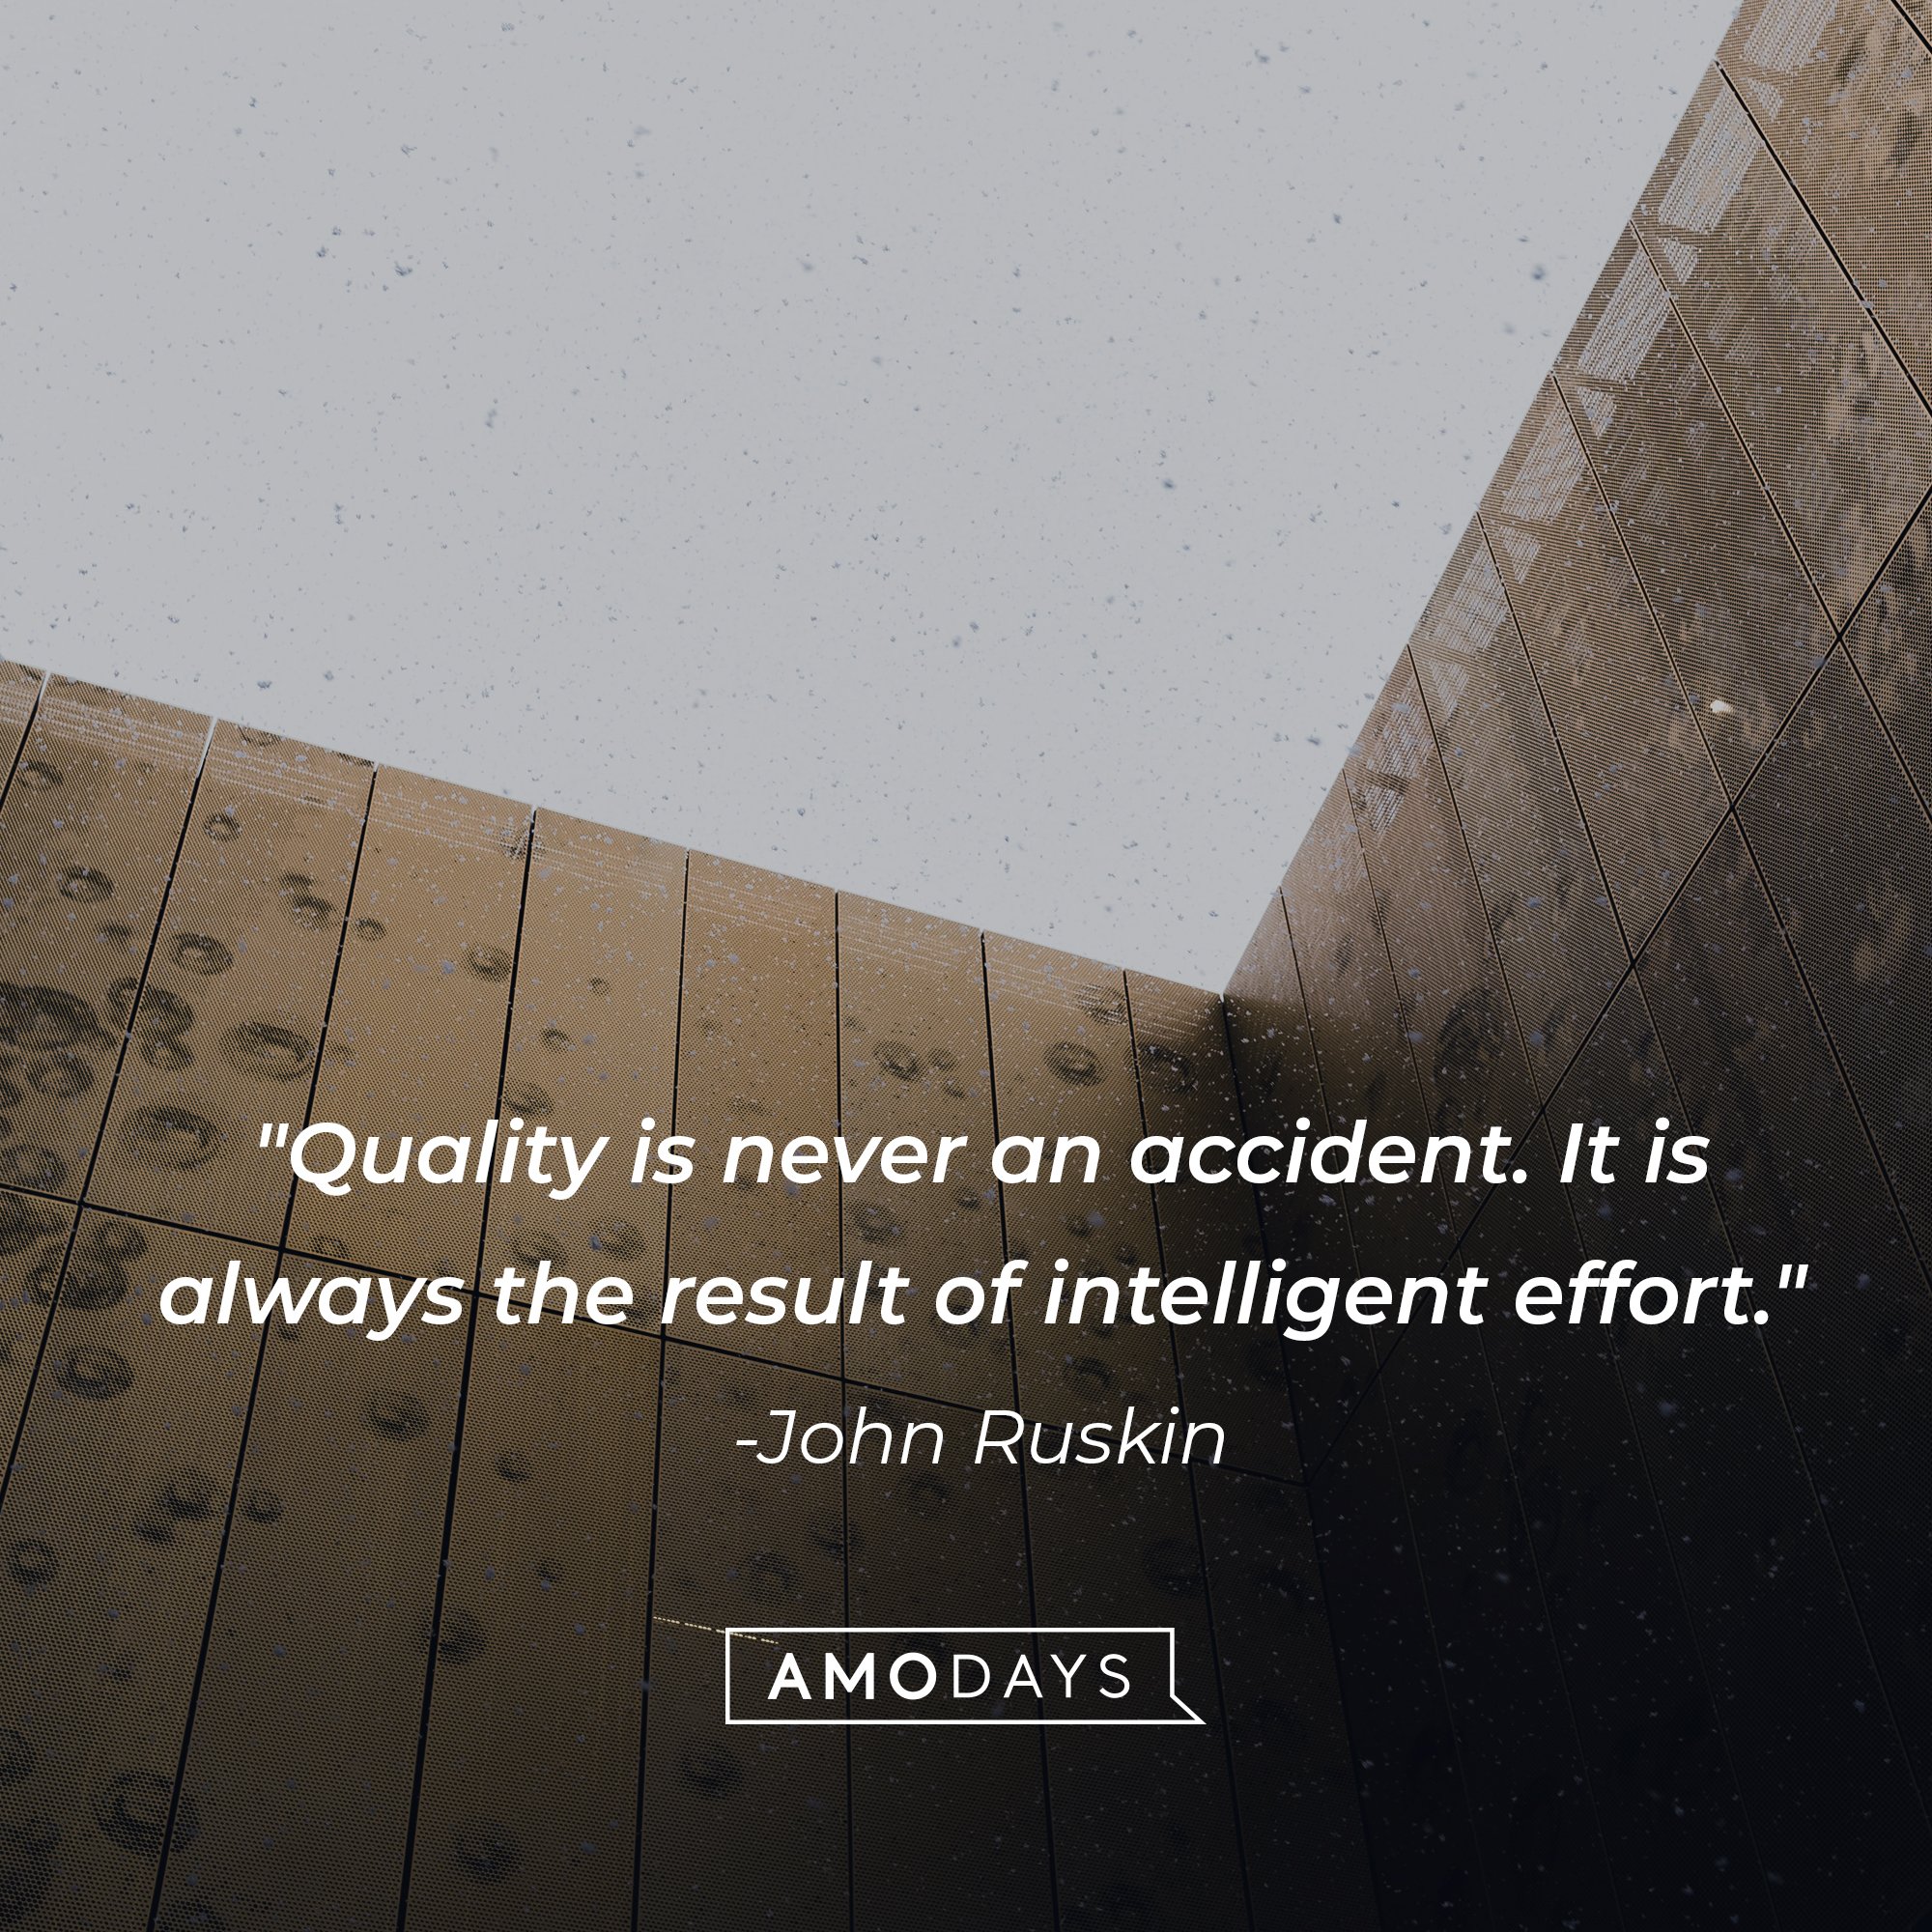 John Ruskin’s quote: "Quality is never an accident. It is always the result of intelligent effort." | Image: AmoDays